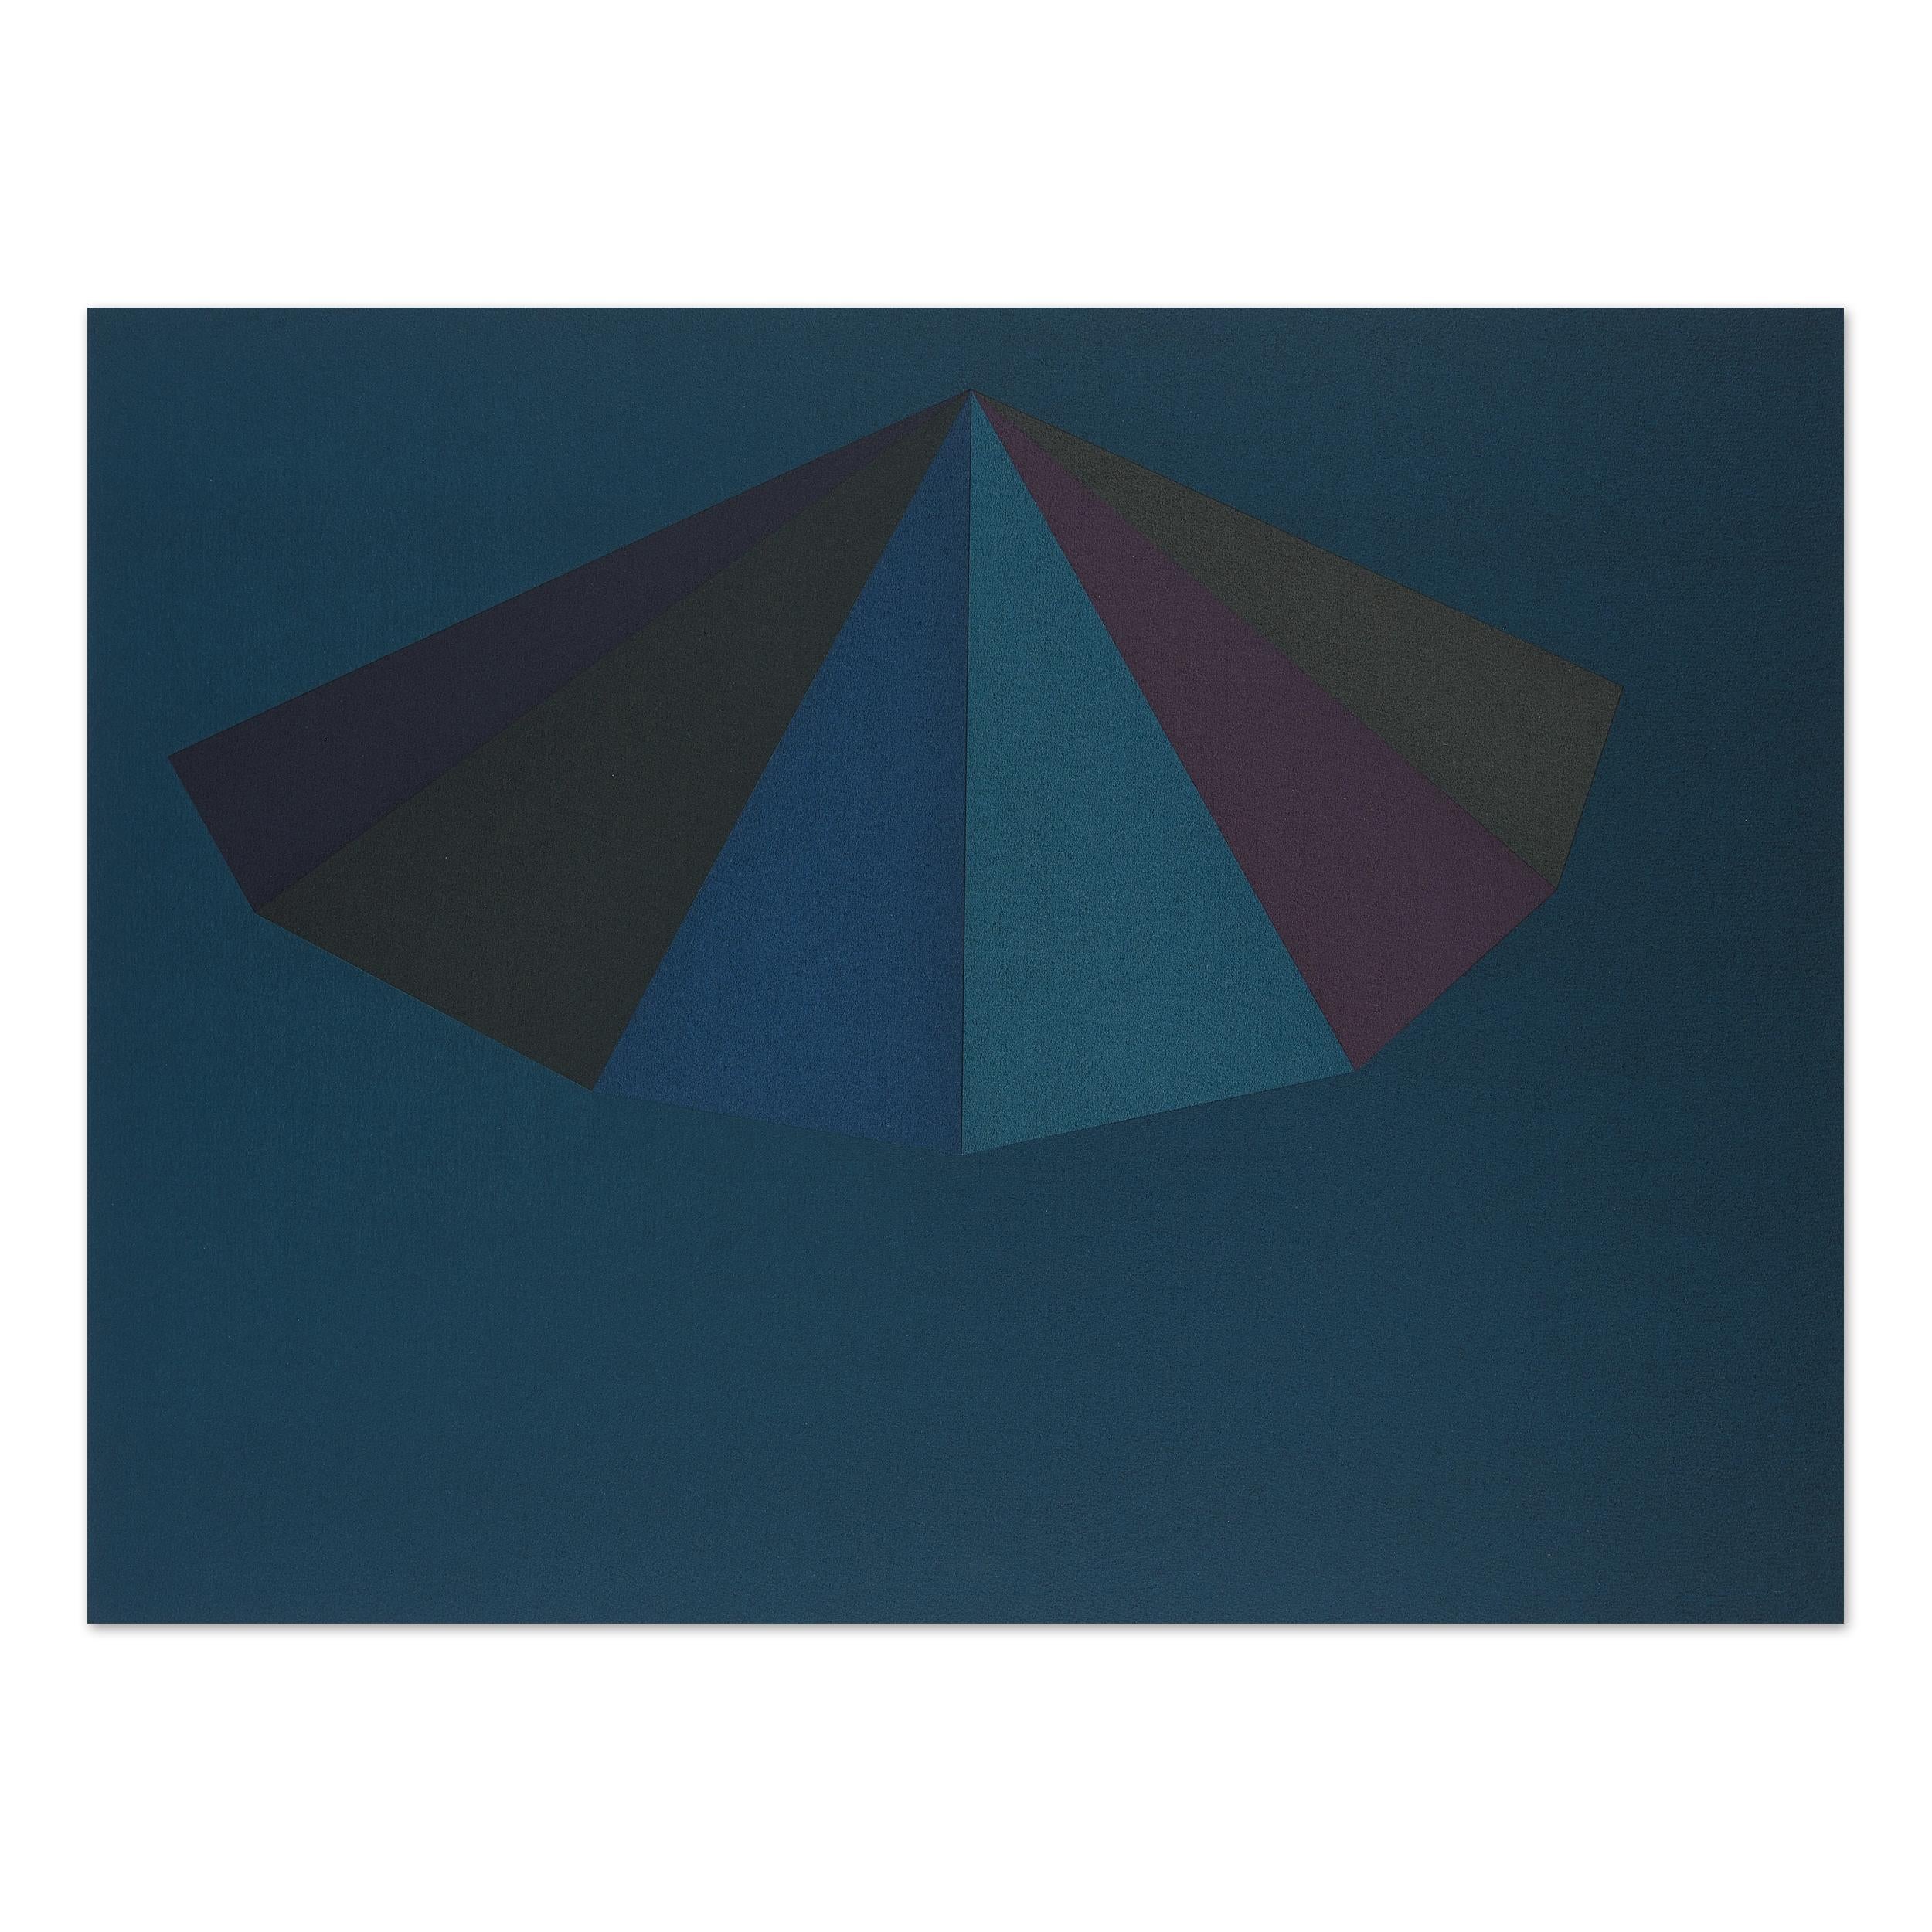 A Pyramid (from For Joseph Beuys), Abstract Geometric, 20th Century Minimalism